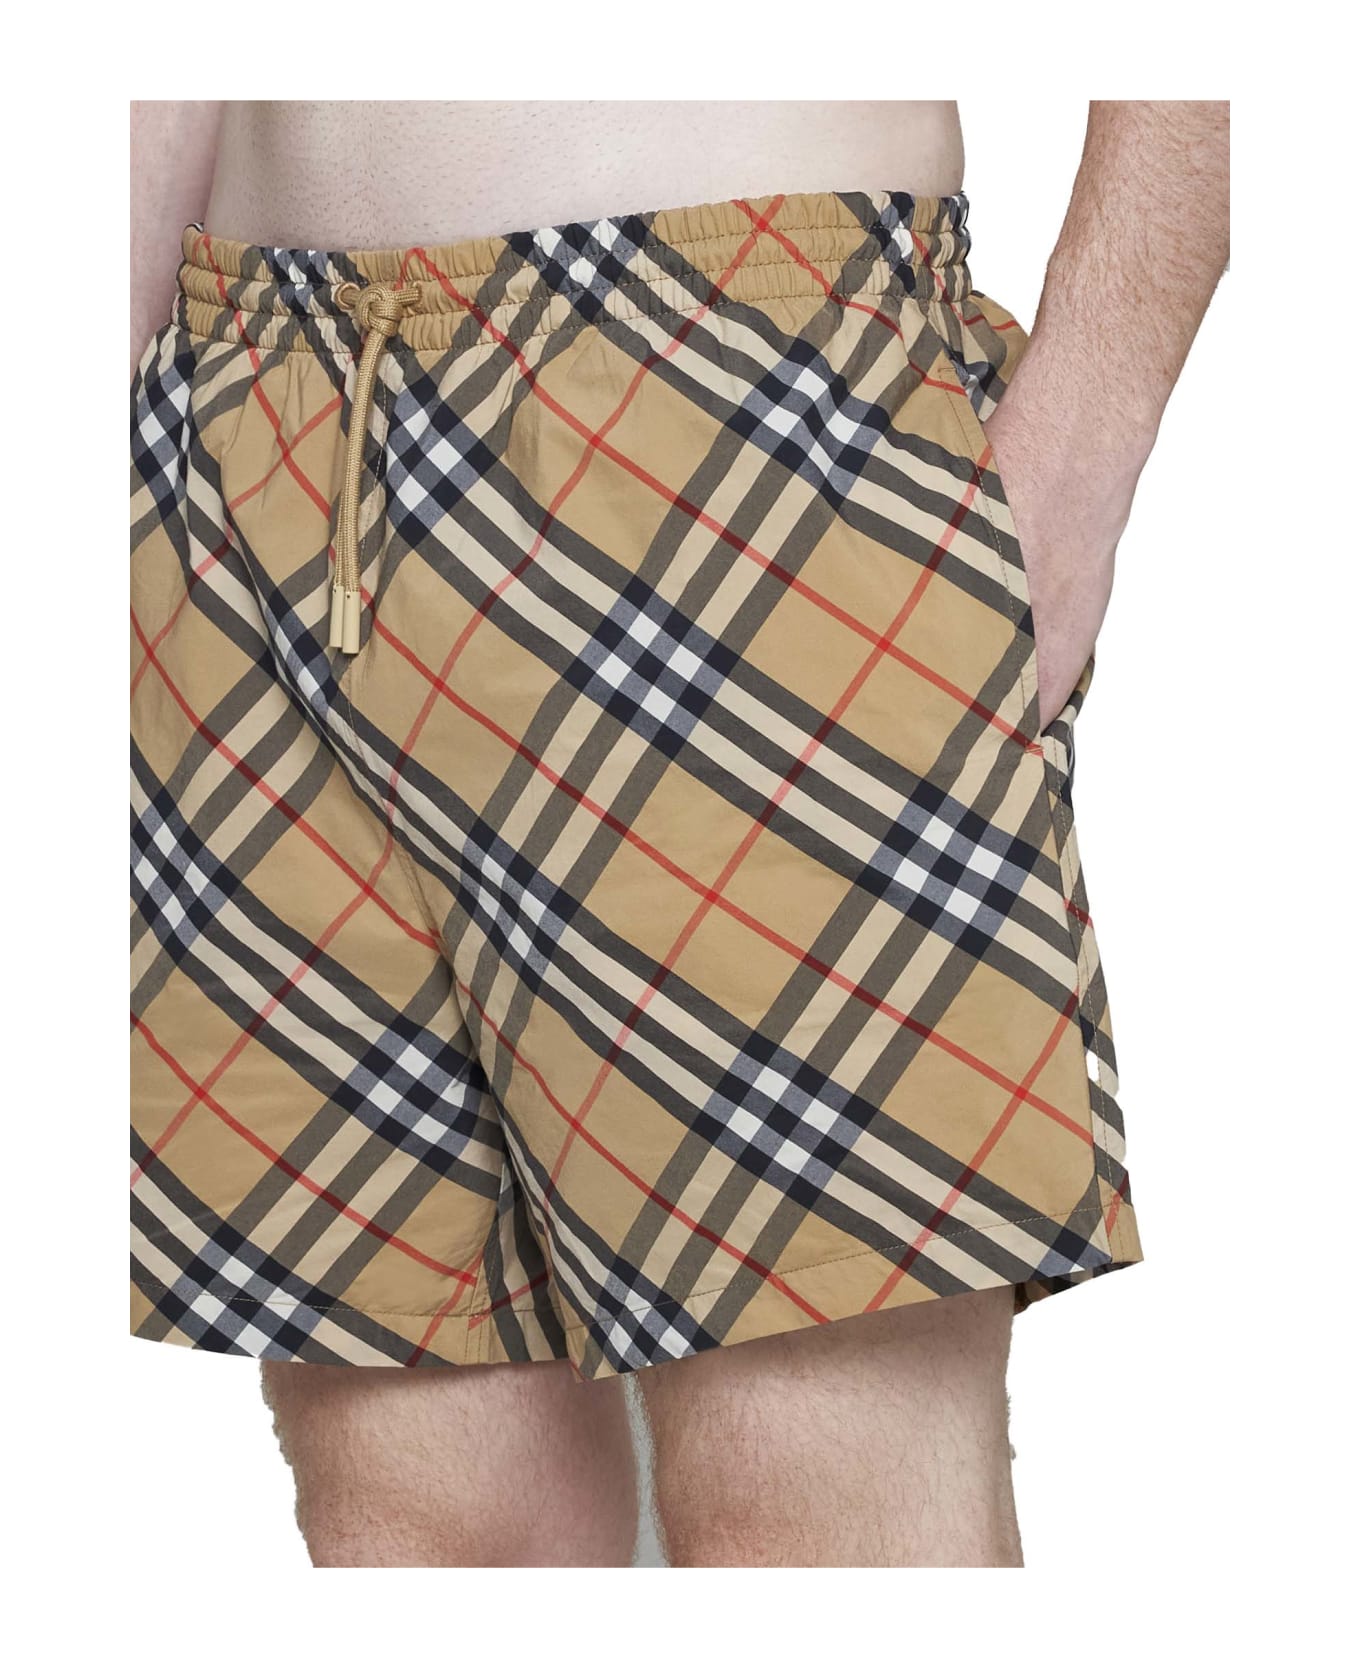 Burberry Swimming Trunks - Sand ip check